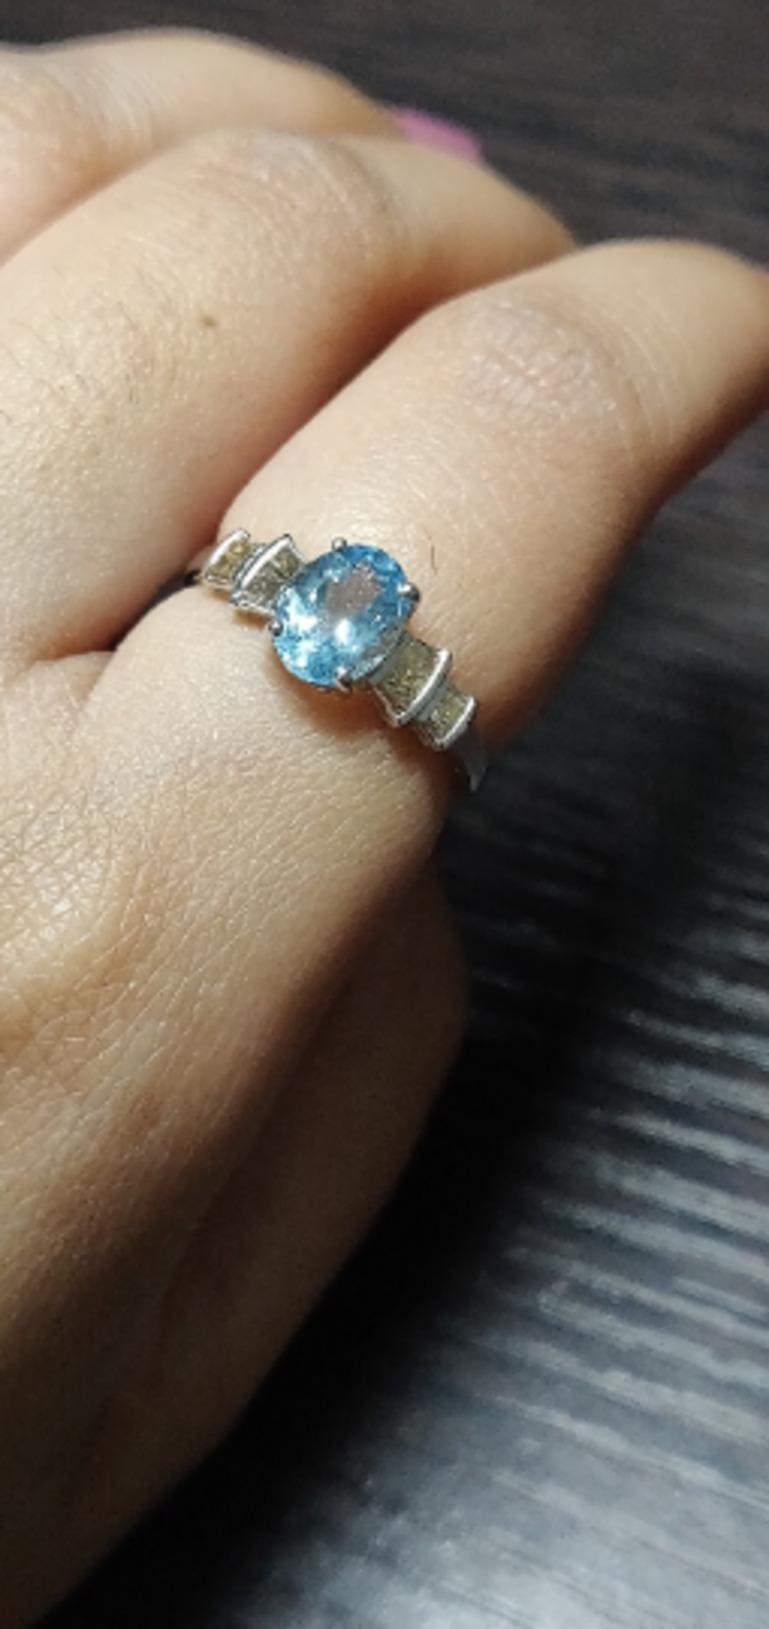 For Sale:  Designer Aquamarine and Diamond Ring Gift for Mom in 925 Sterling Silver 4